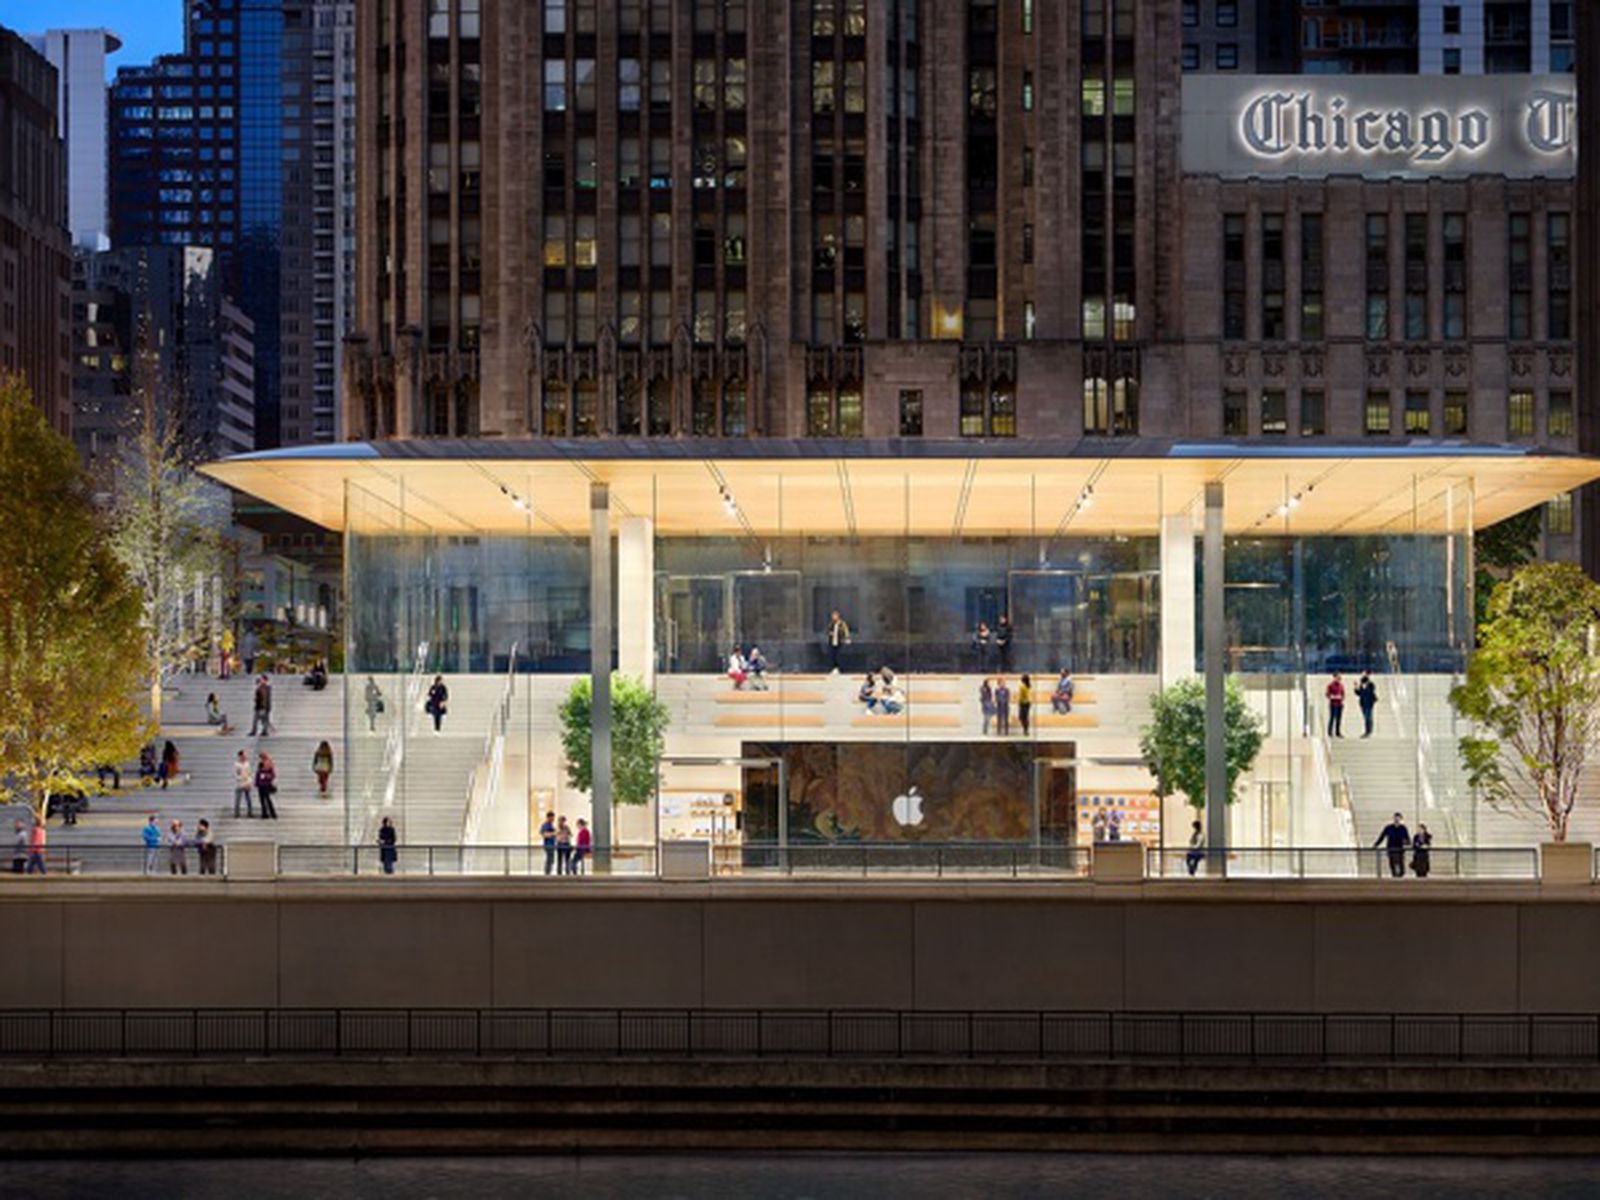 Sale of Apple's Michigan Avenue flagship store will mark one of Chicago's  most expensive retail real estate deals - 9to5Mac